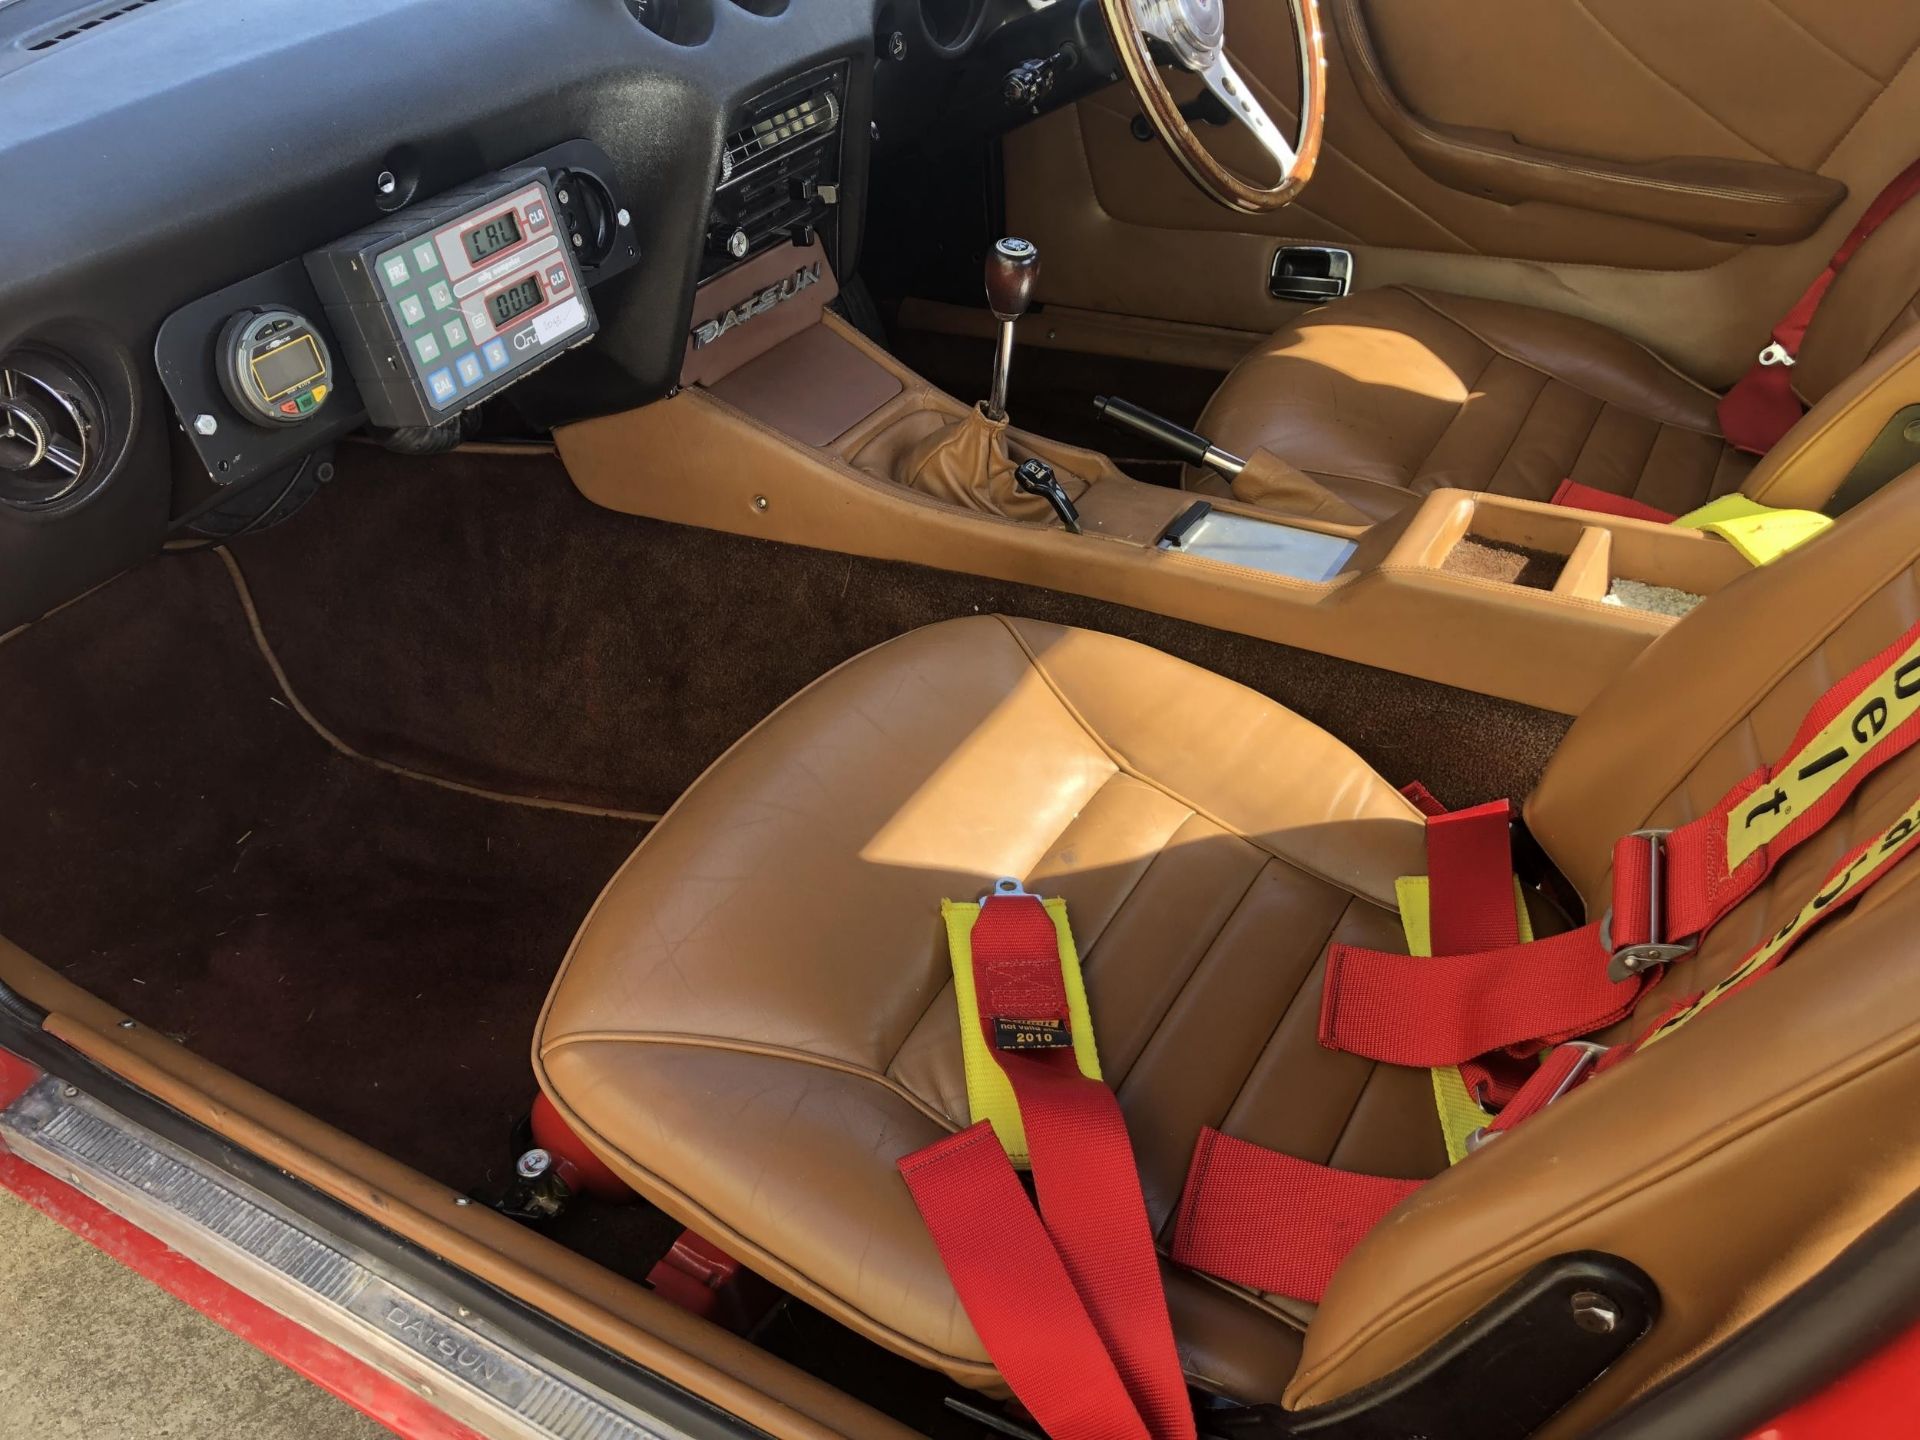 1972 Datsun 240Z Registration number WBN 465K Ferrari Rosso Corsa with a tan interior Stripped - Image 57 of 65